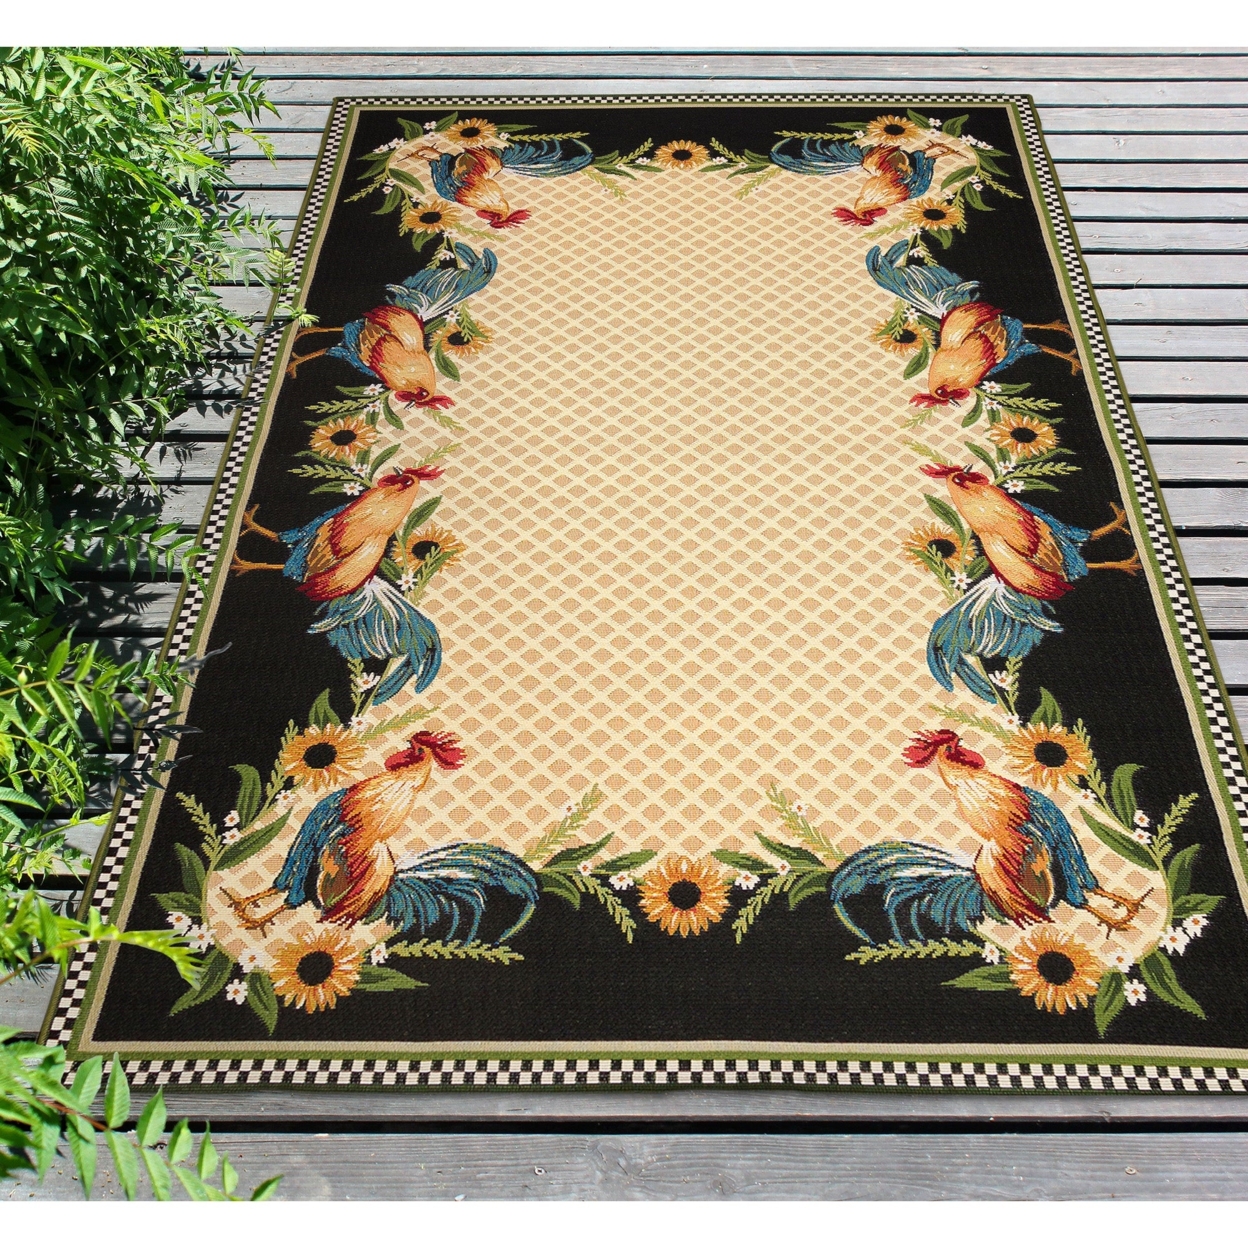 Liora Manne Marina Country Rooster Indoor Outdoor Area Rug Yellow - 4'10 X 7'6